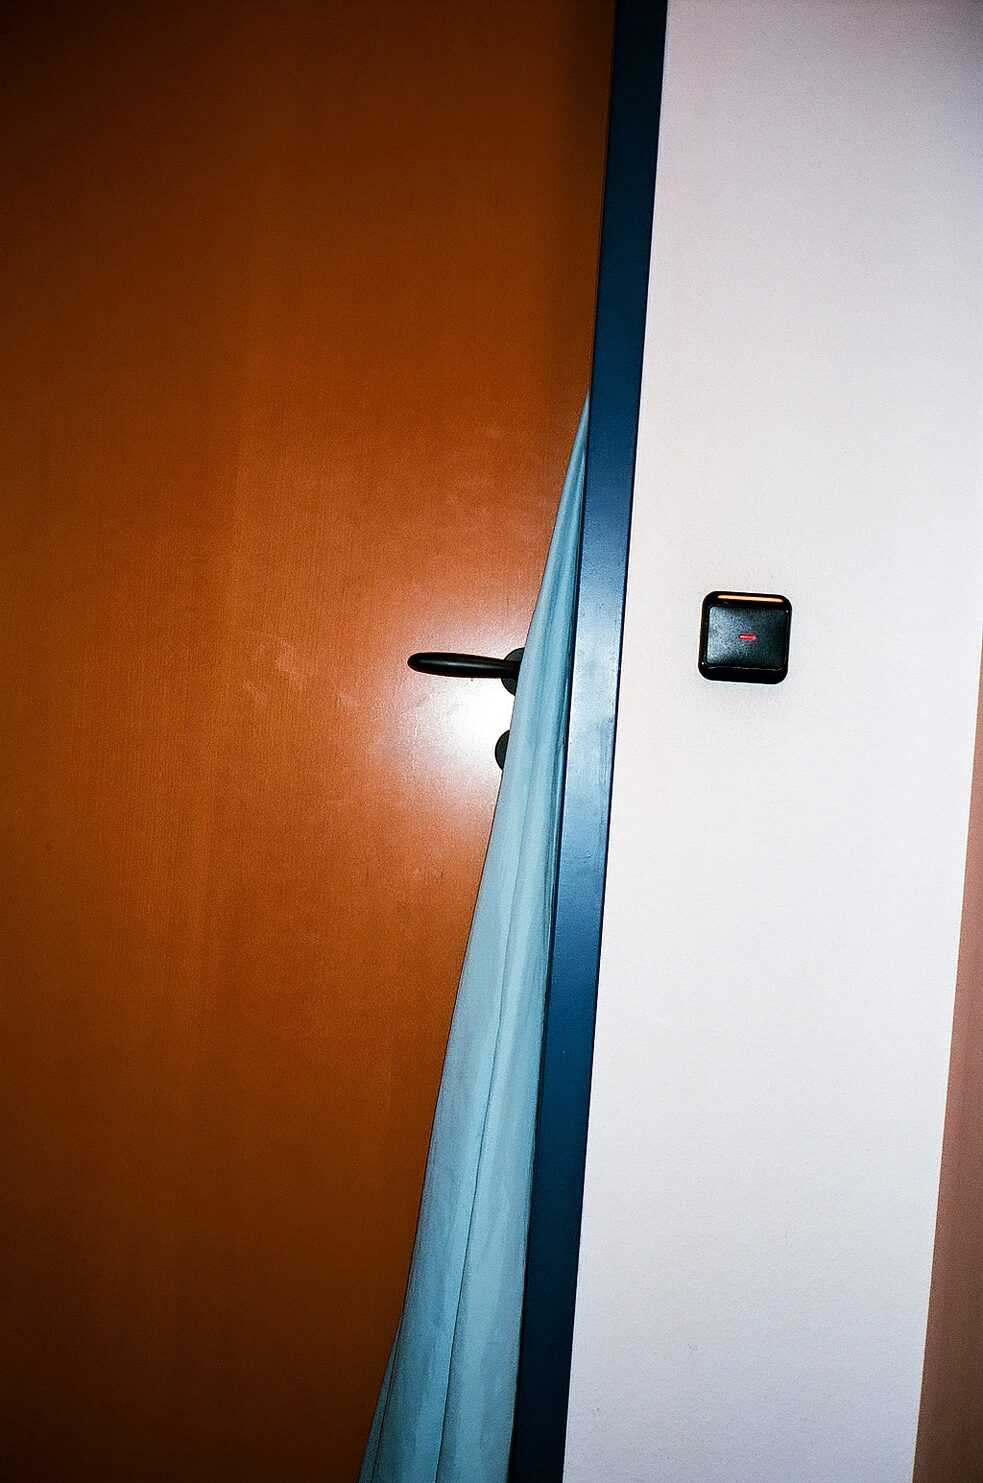 Duschvorhang / "Shower Curtain"  - from the photo essay "Folded, Always a Mistake" by Christian Werner